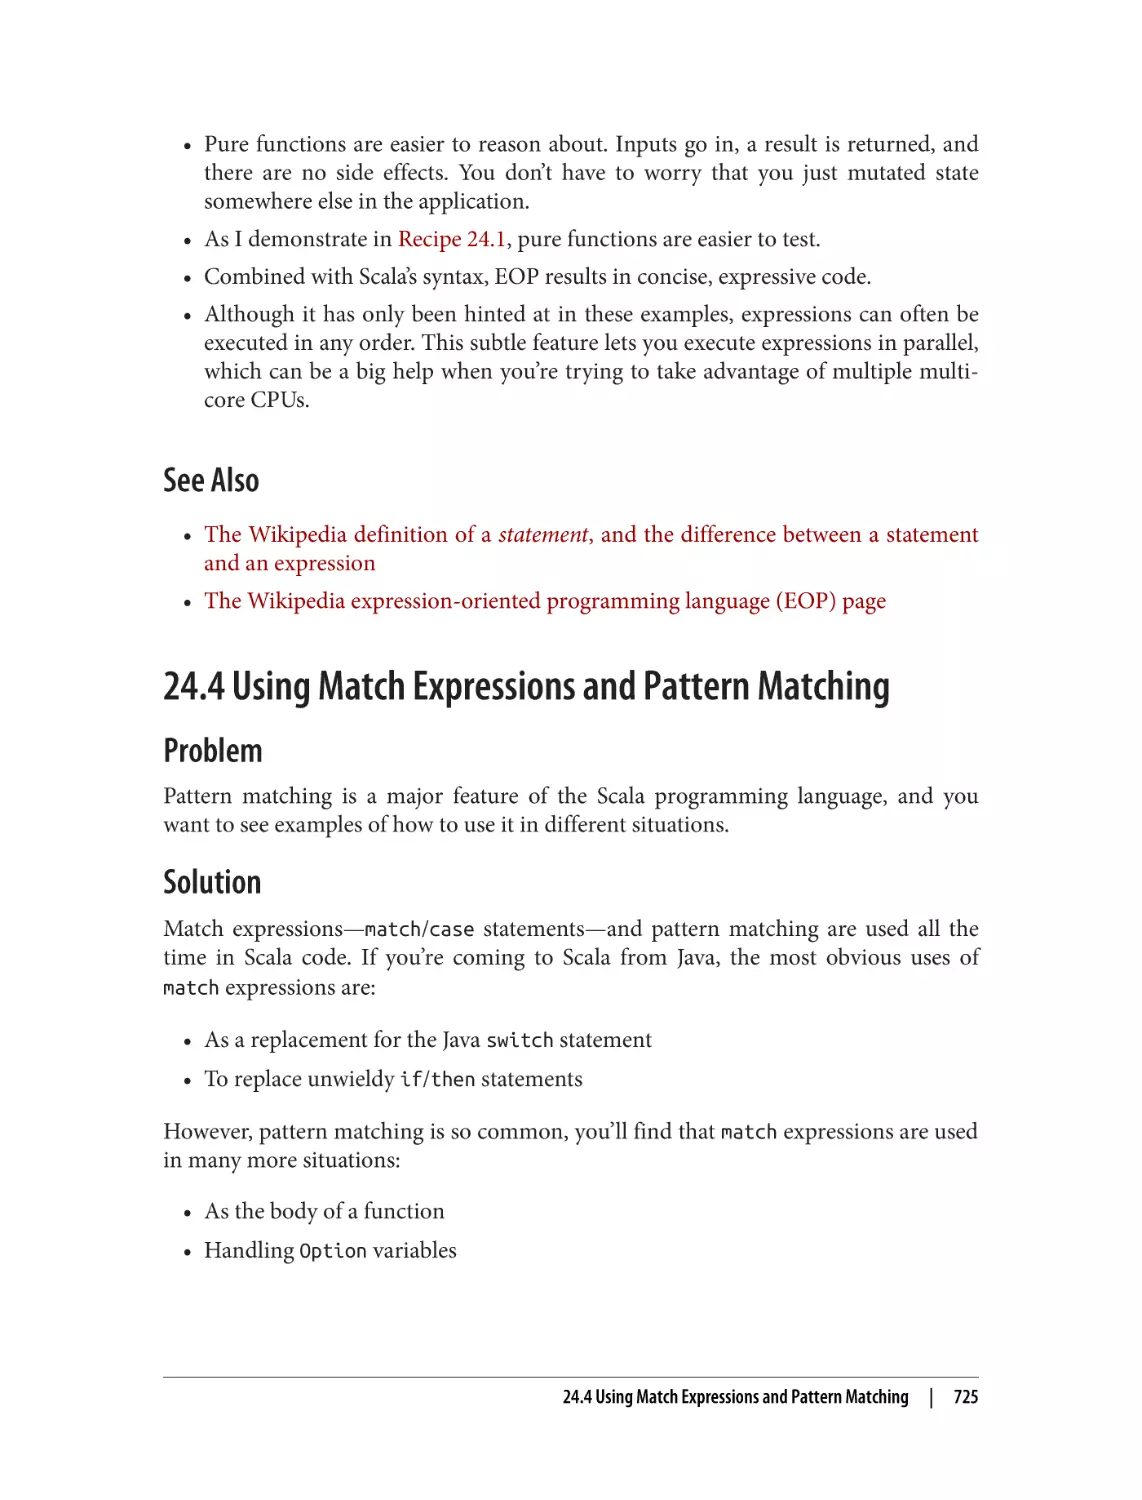 See Also
24.4 Using Match Expressions and Pattern Matching
Problem
Solution